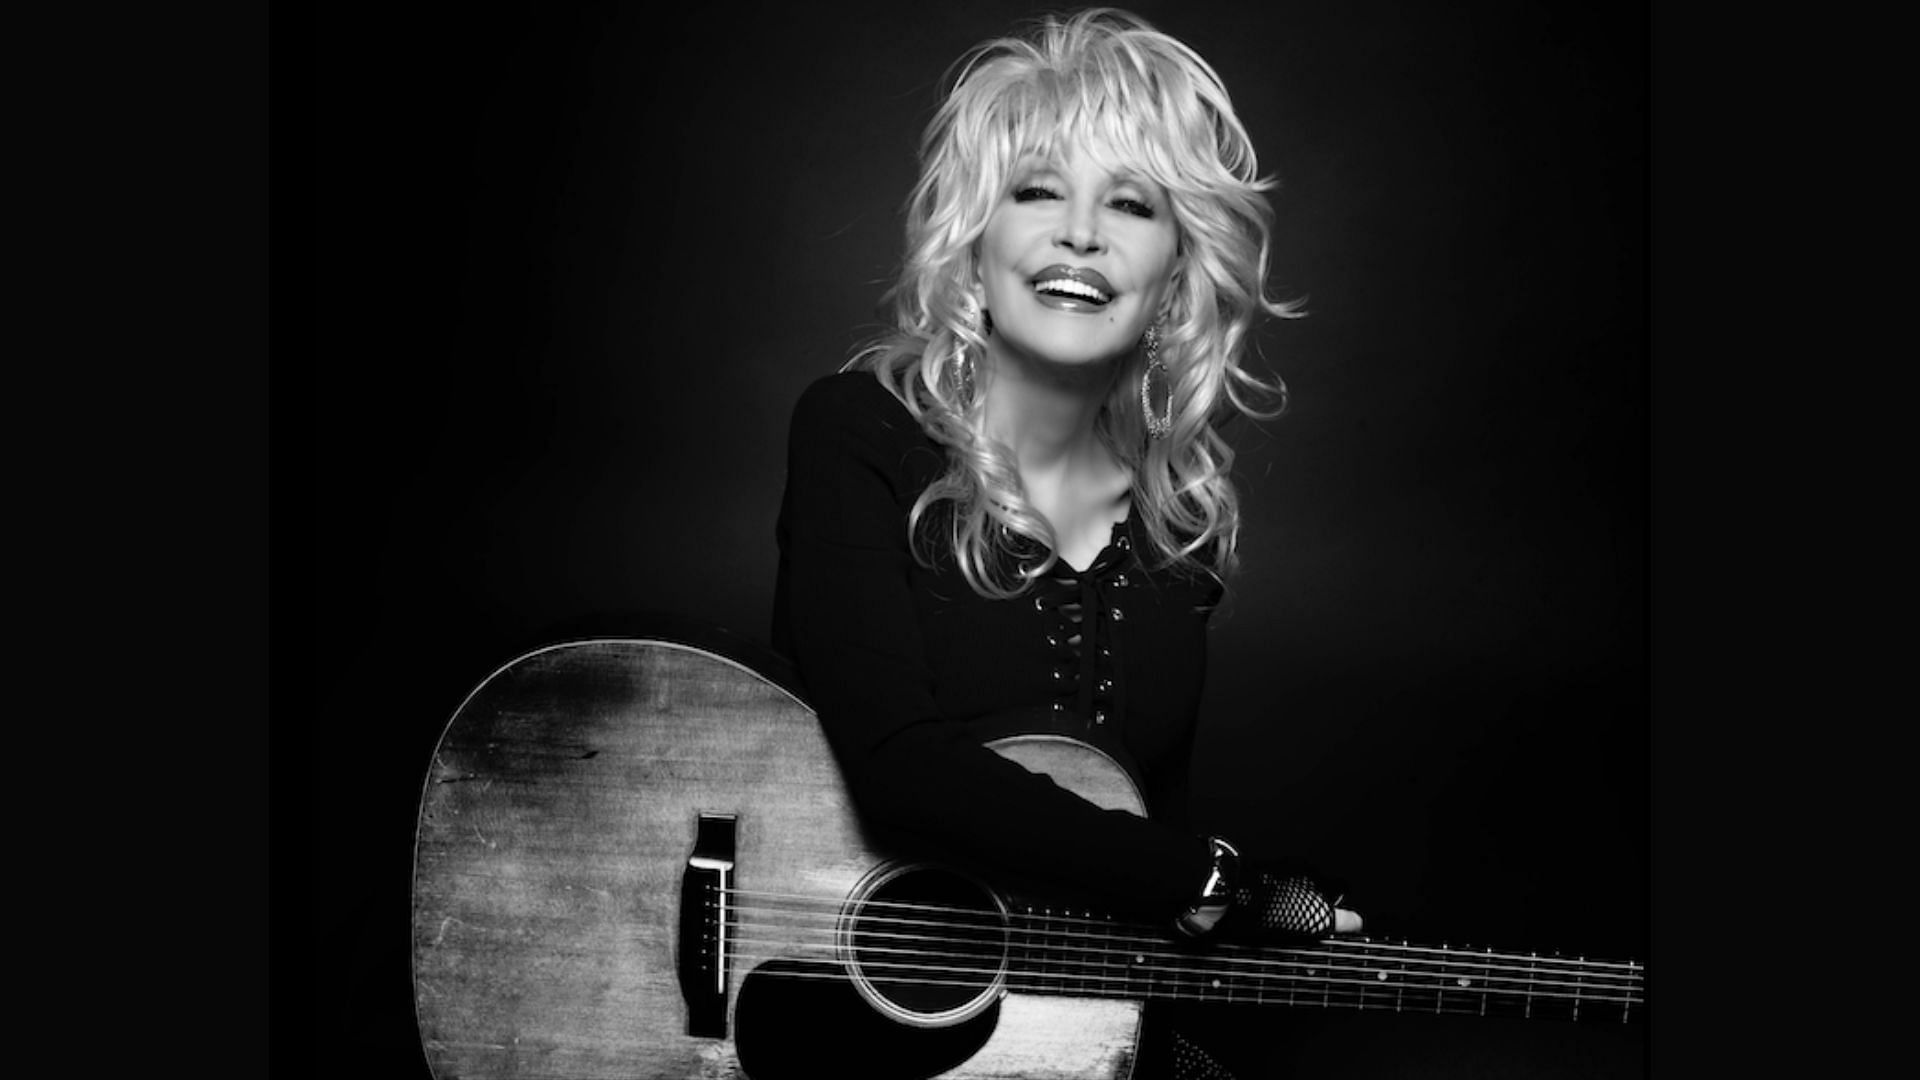 American icon Dolly Parton turns 77 on January 19, 2023 (Image via @DollyParton/Twitter).